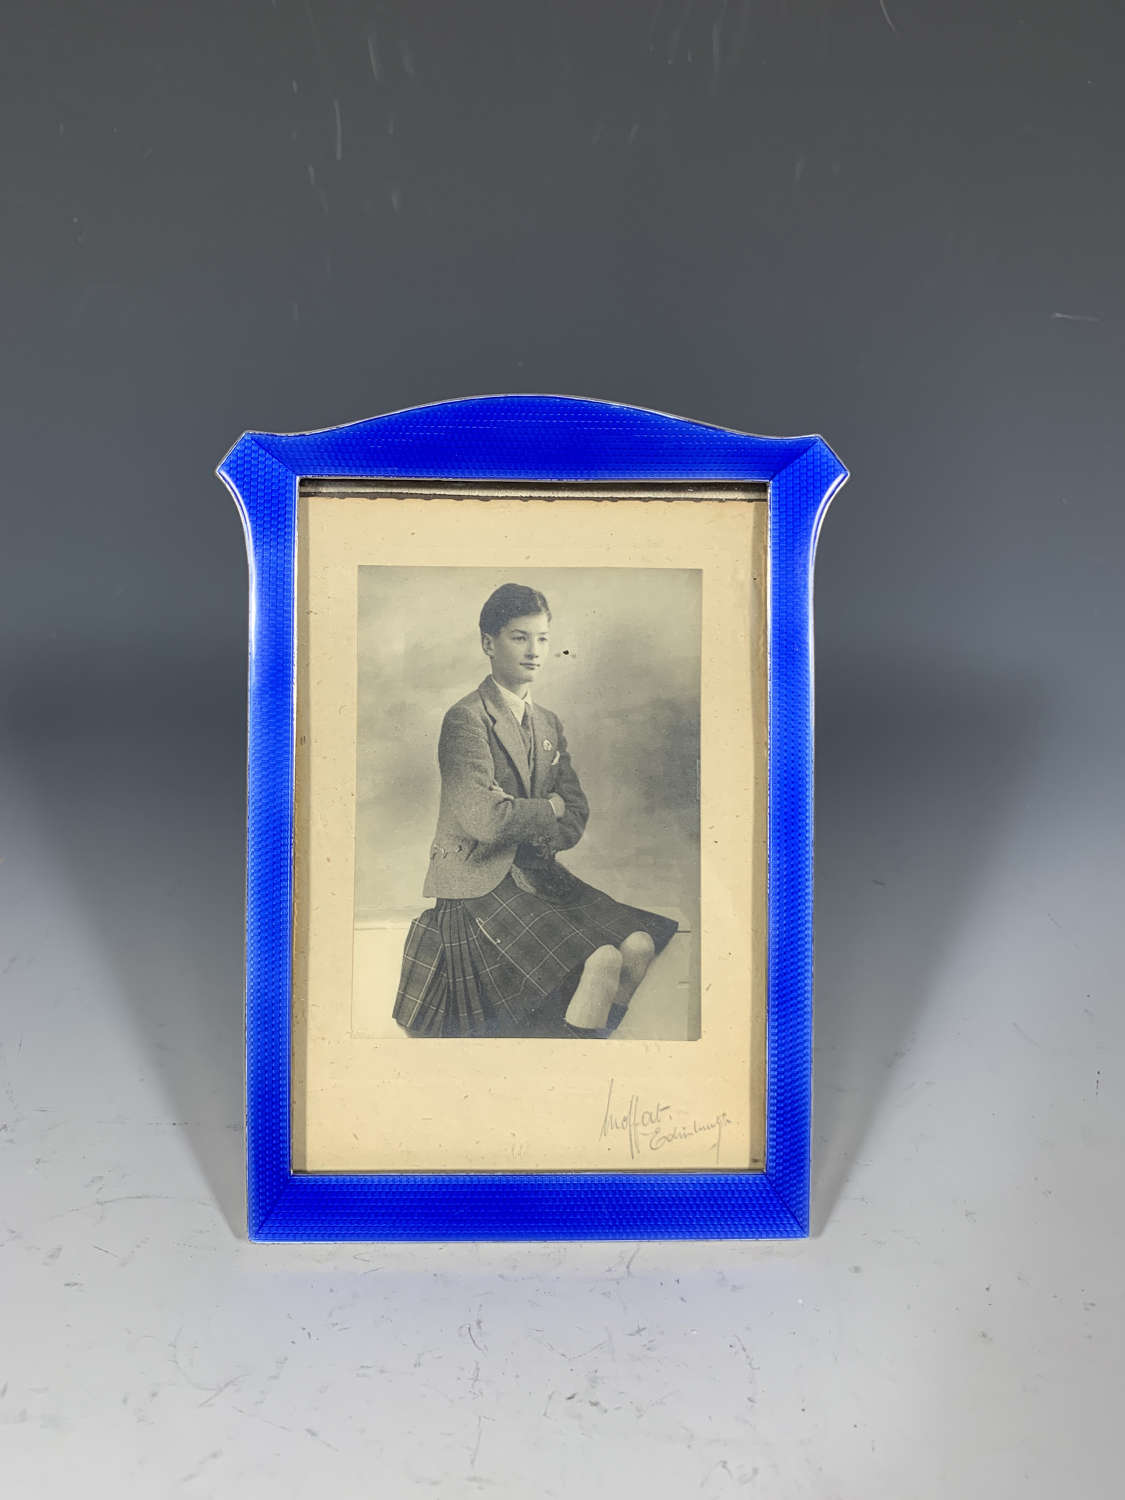 A sterling silver and navy blue guilloche enamel photograph frame